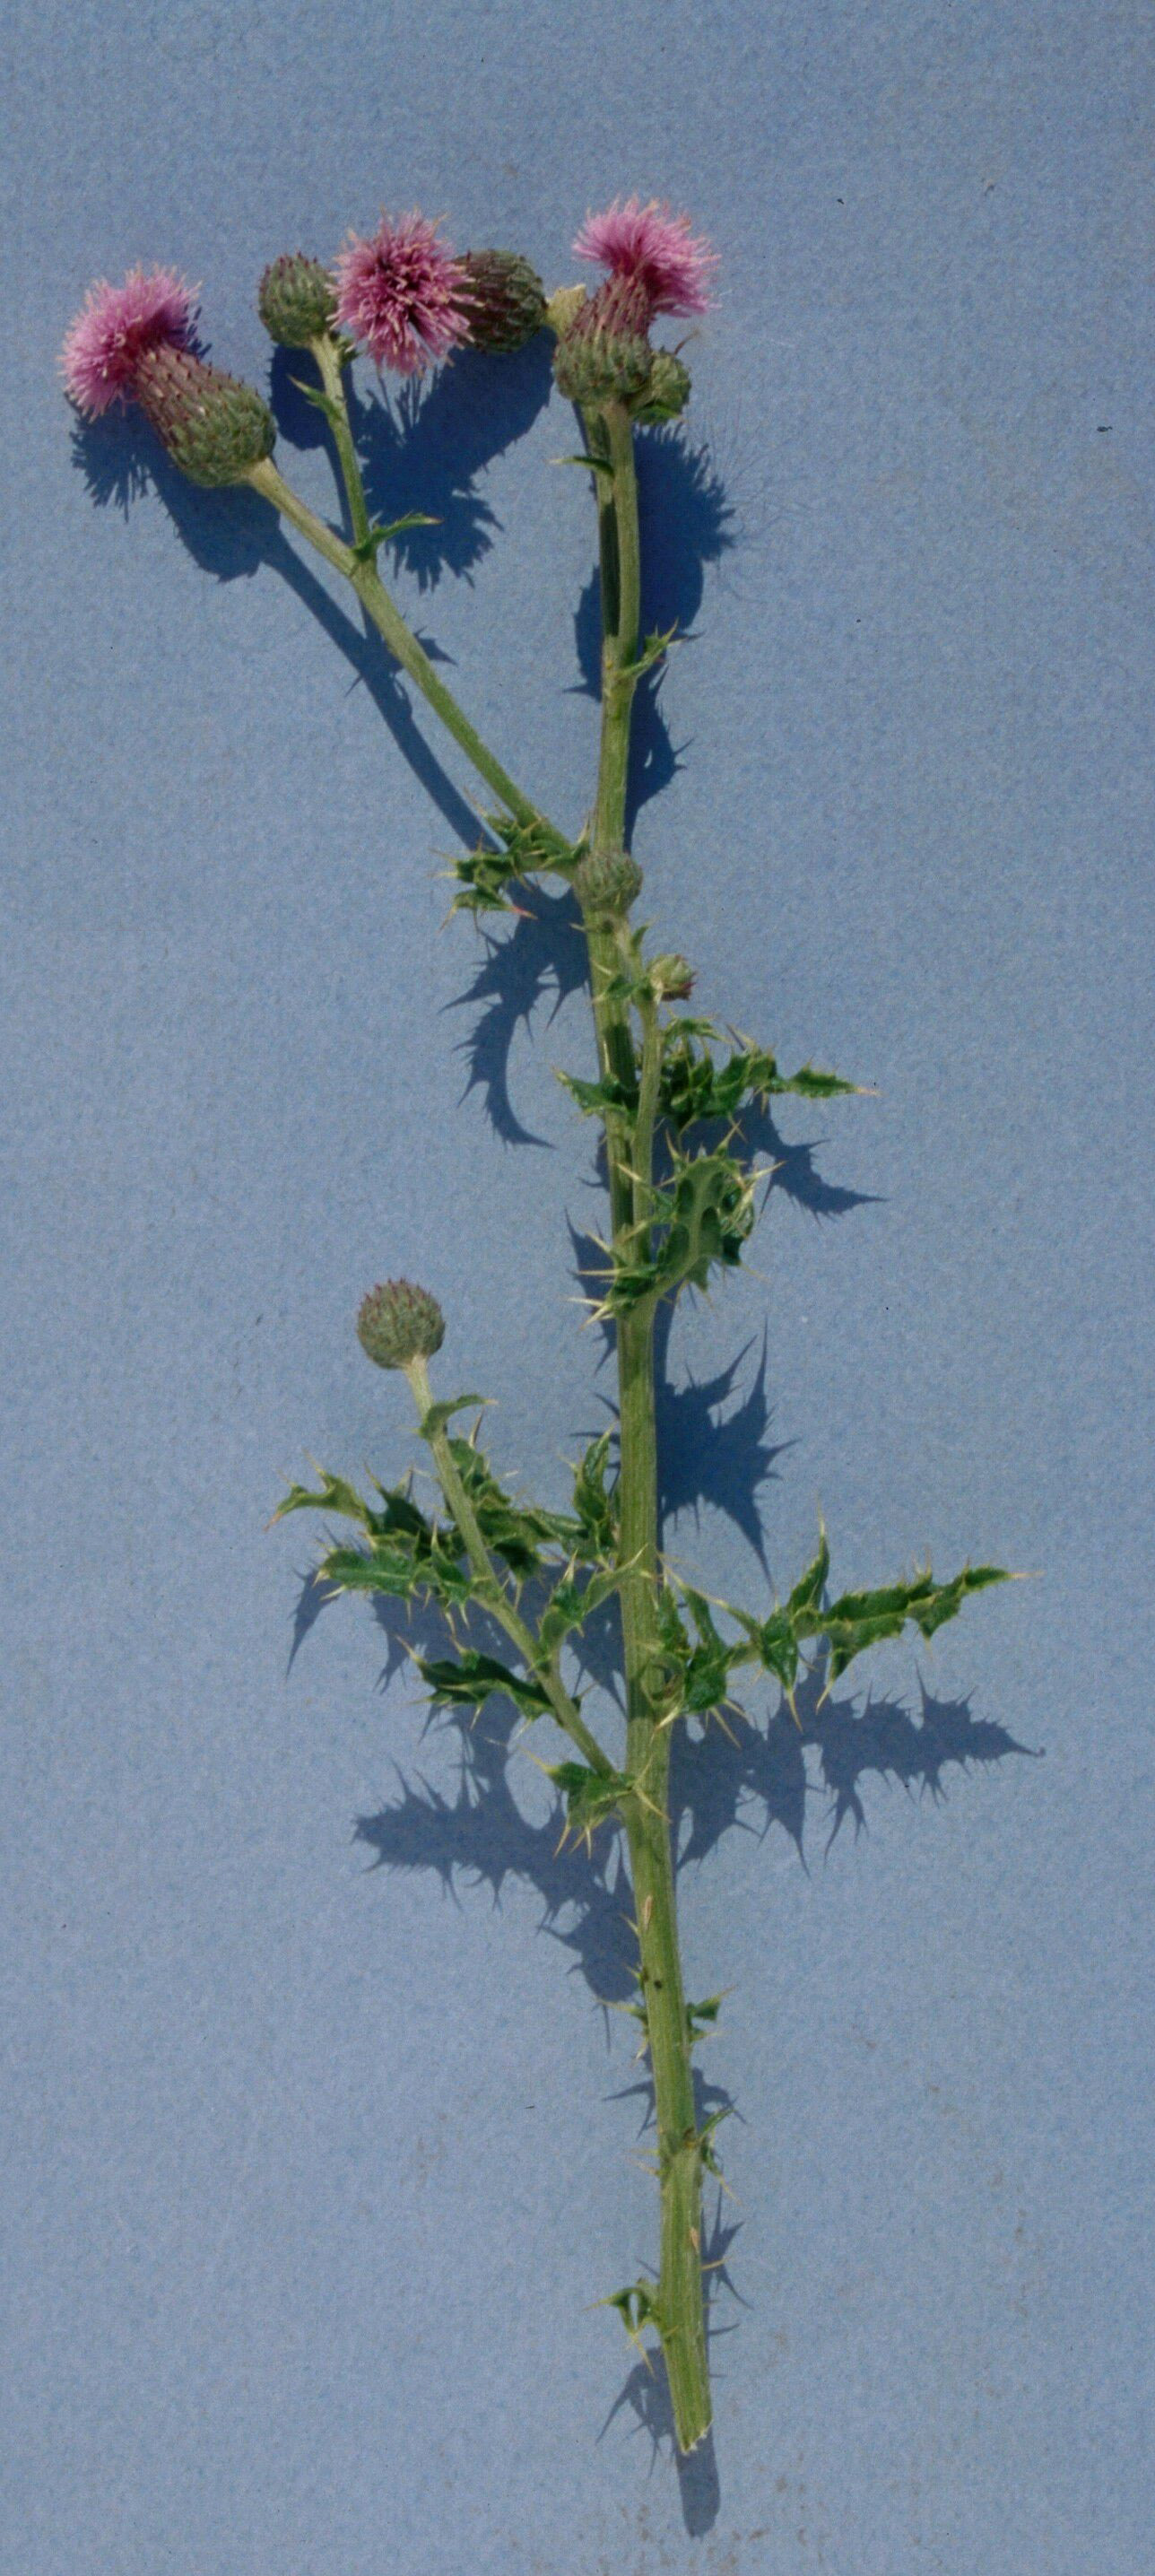 Canada thistle in bloom 